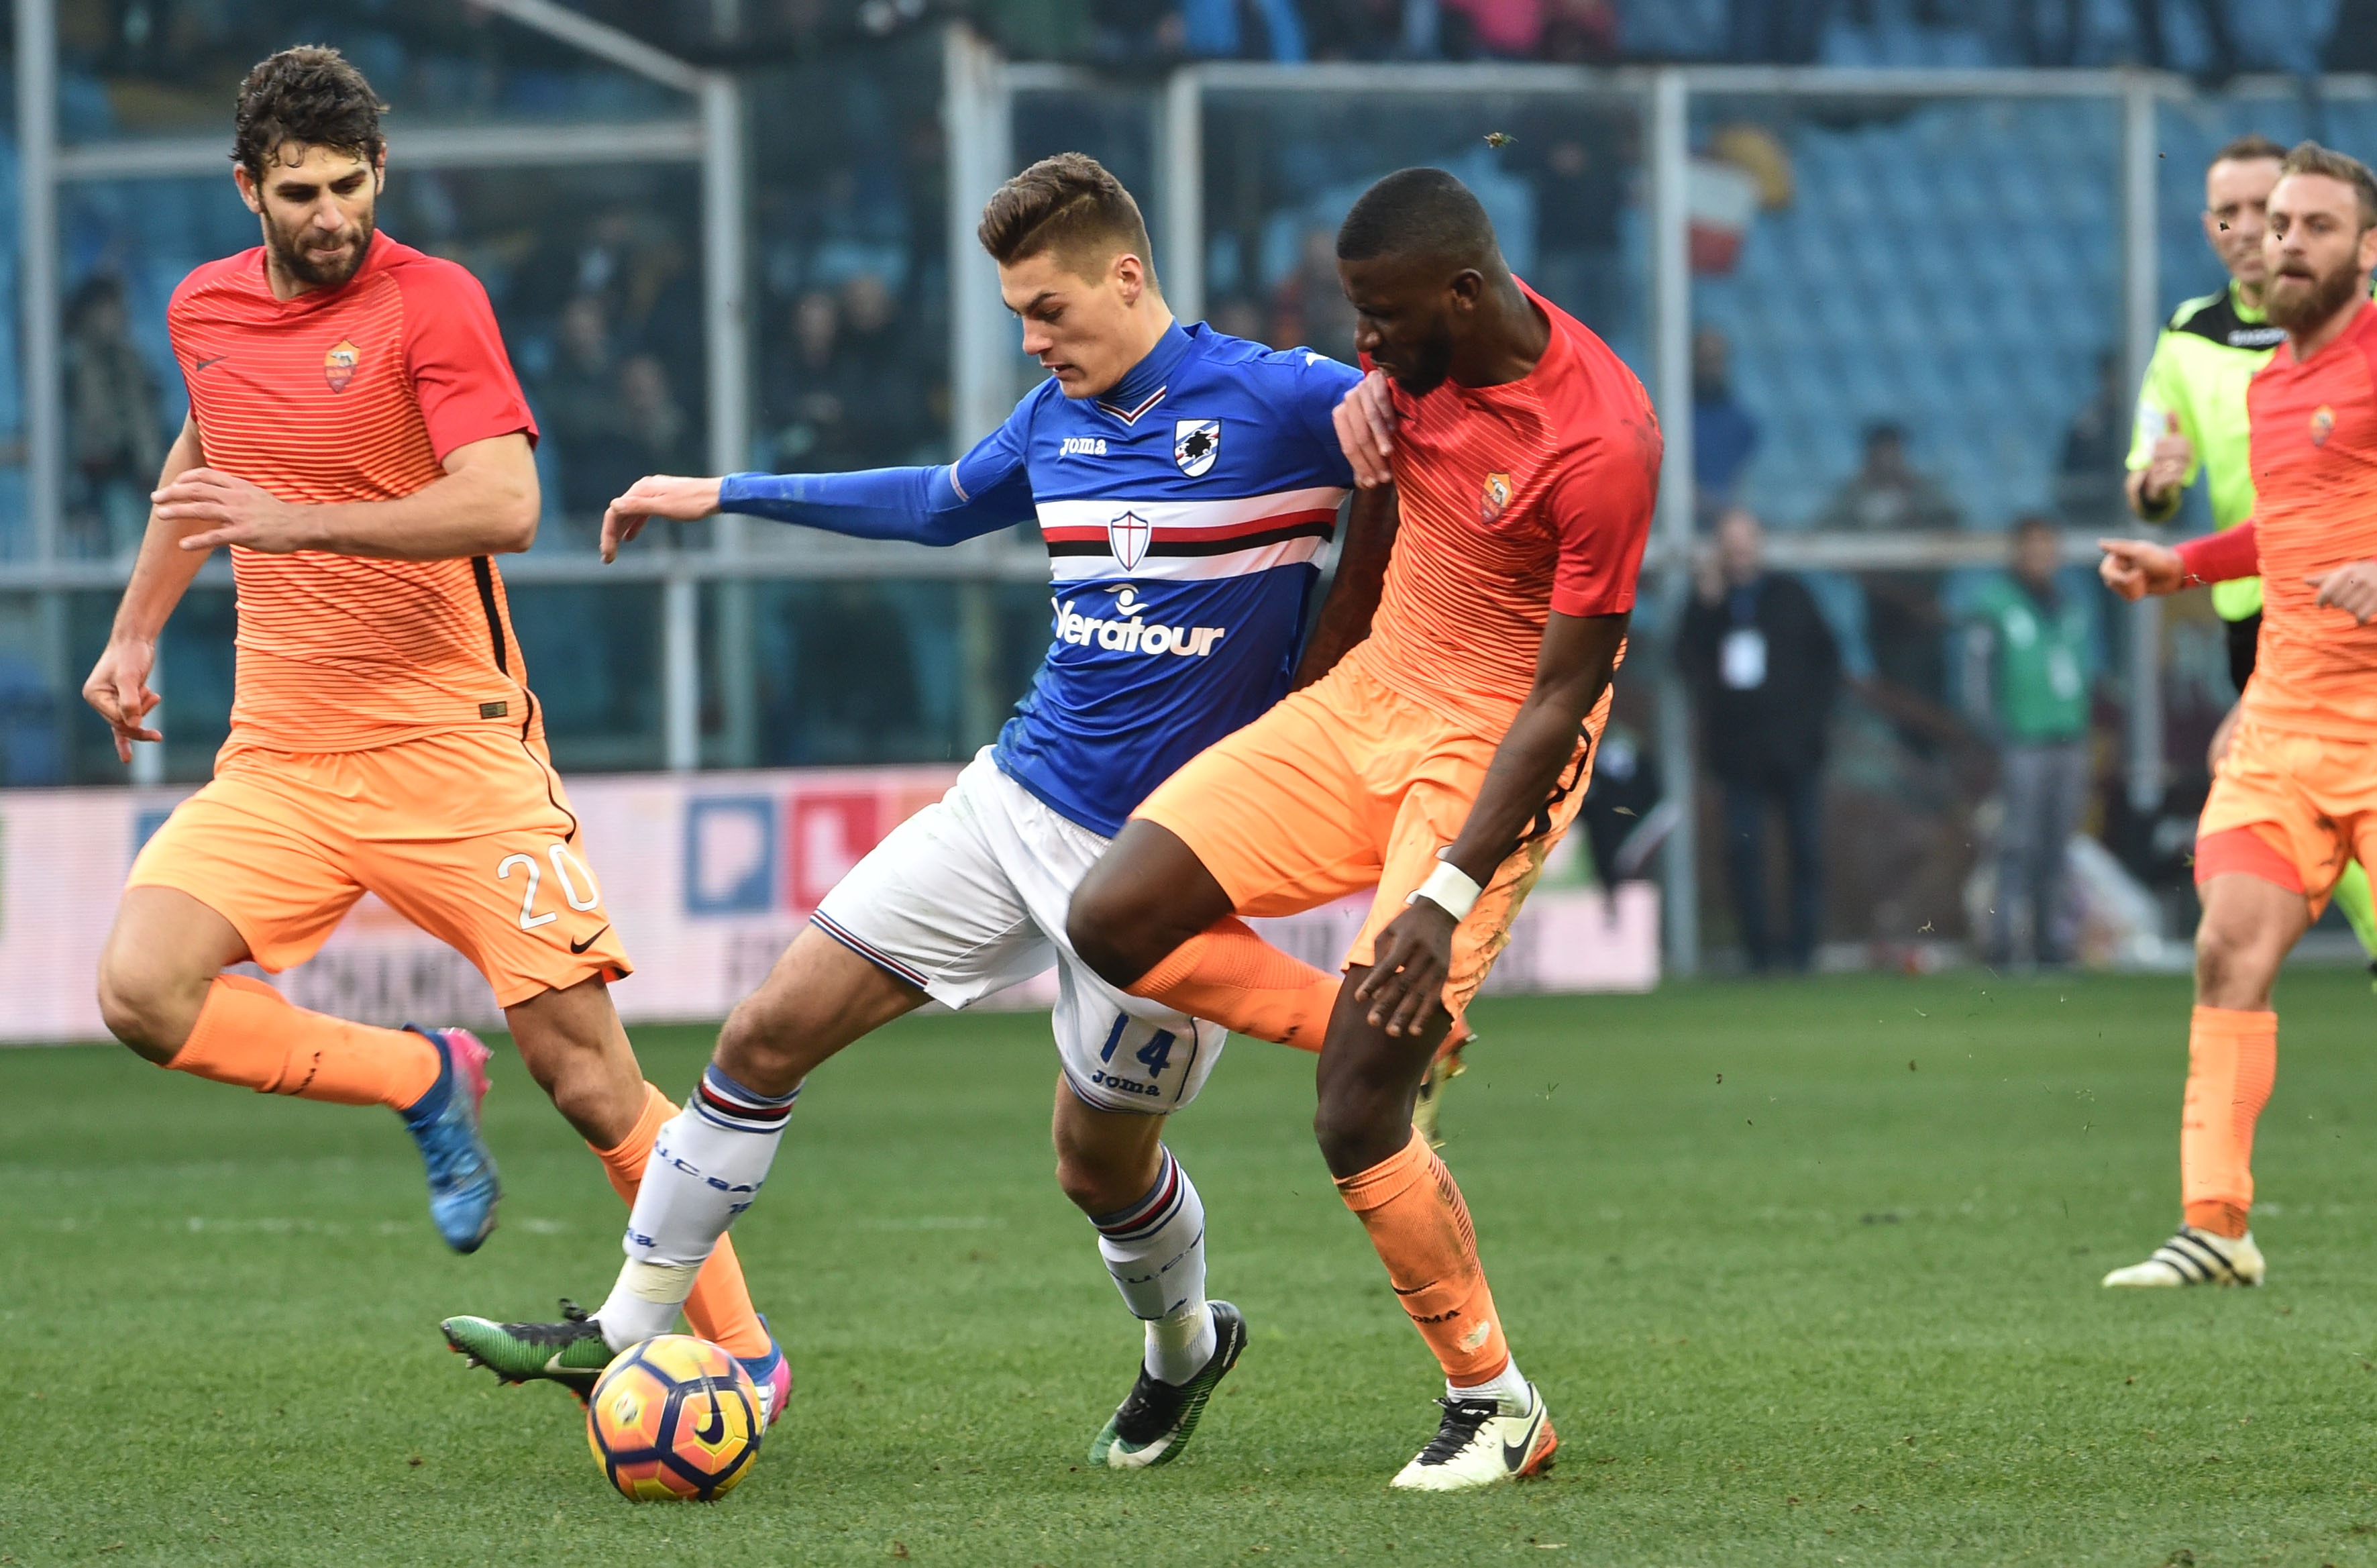 Paganin: “Schick could help Inter. It takes a strong mentality to play for the nerazzurri